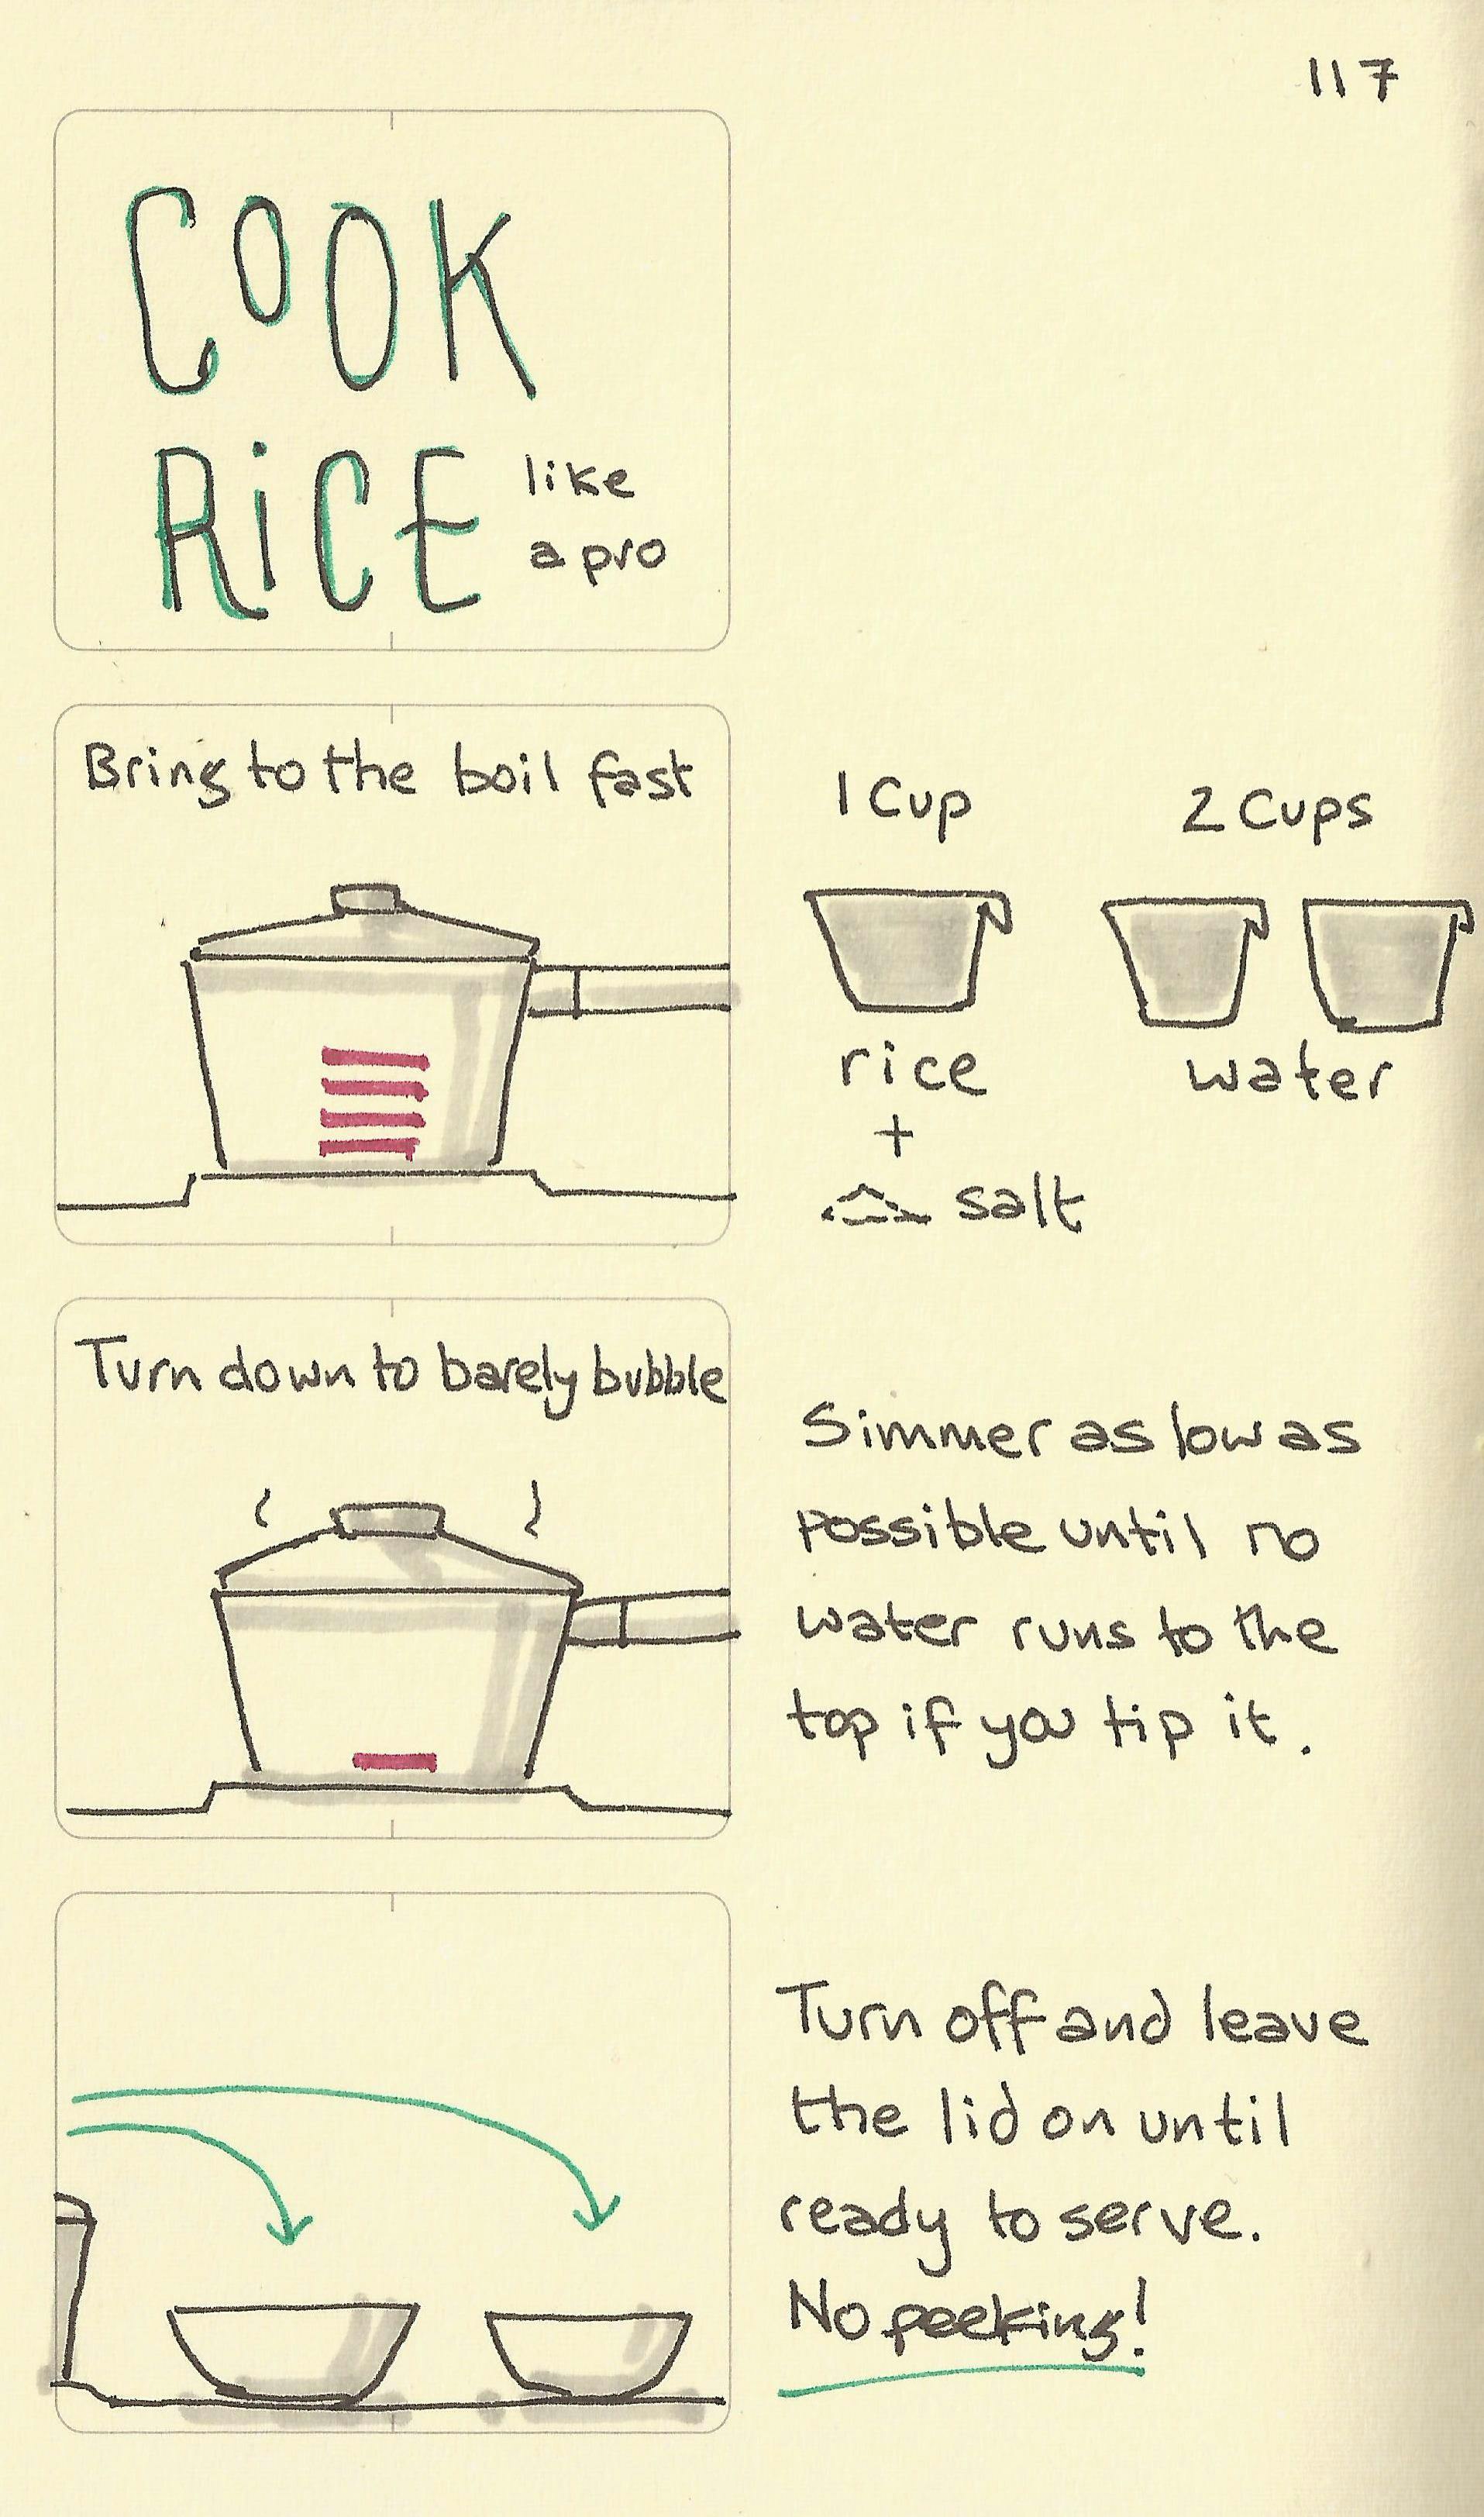 Cook rice like a pro - Sketchplanations